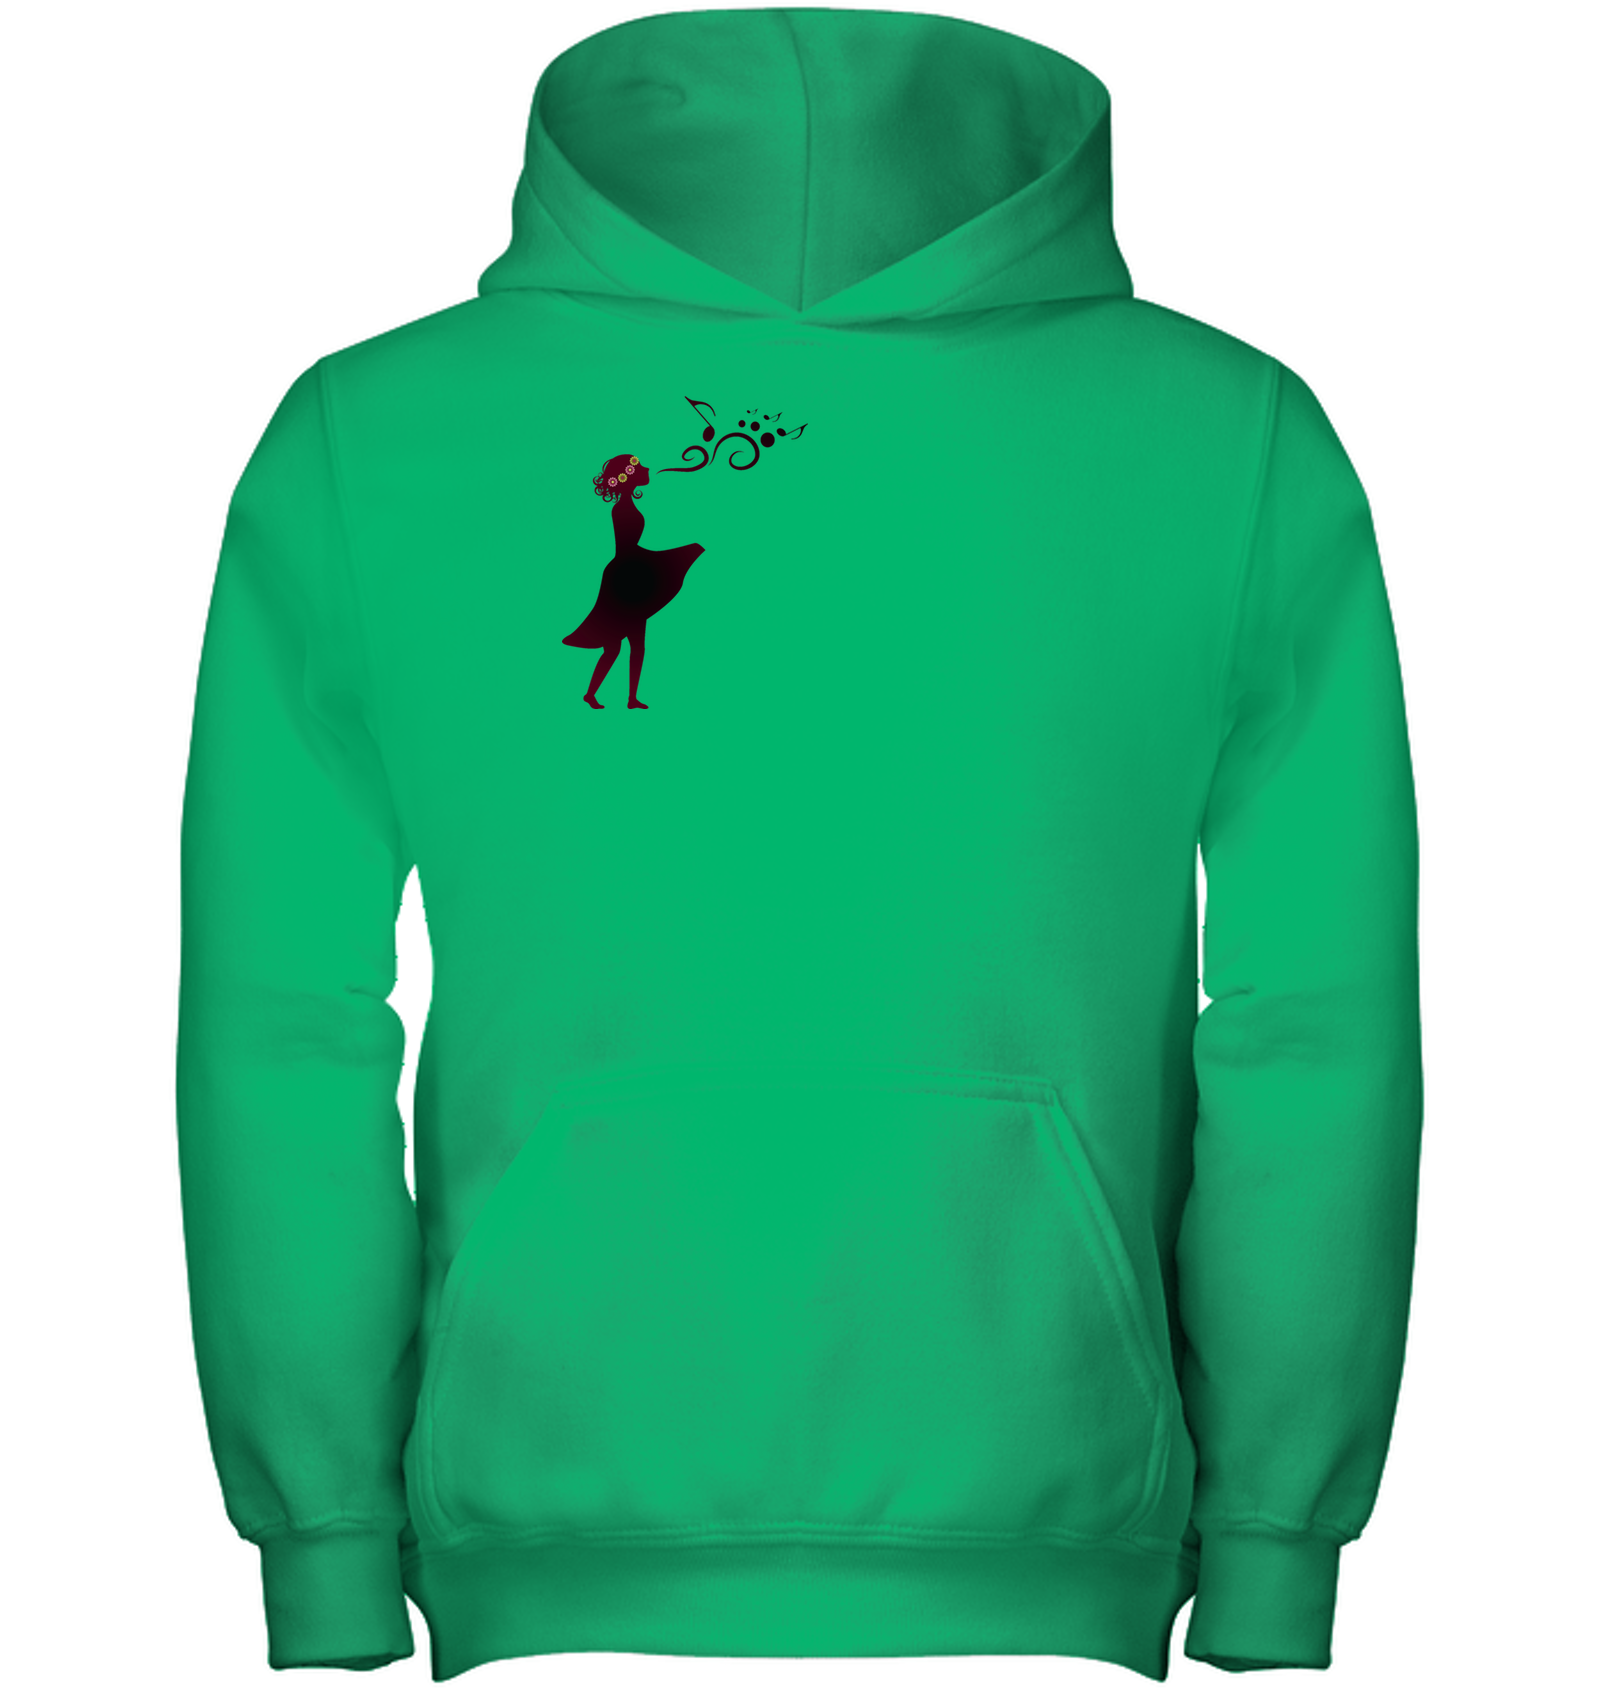 Girl Singing Silhouette (Pocket Size) - Gildan Youth Heavyweight Pullover Hoodie